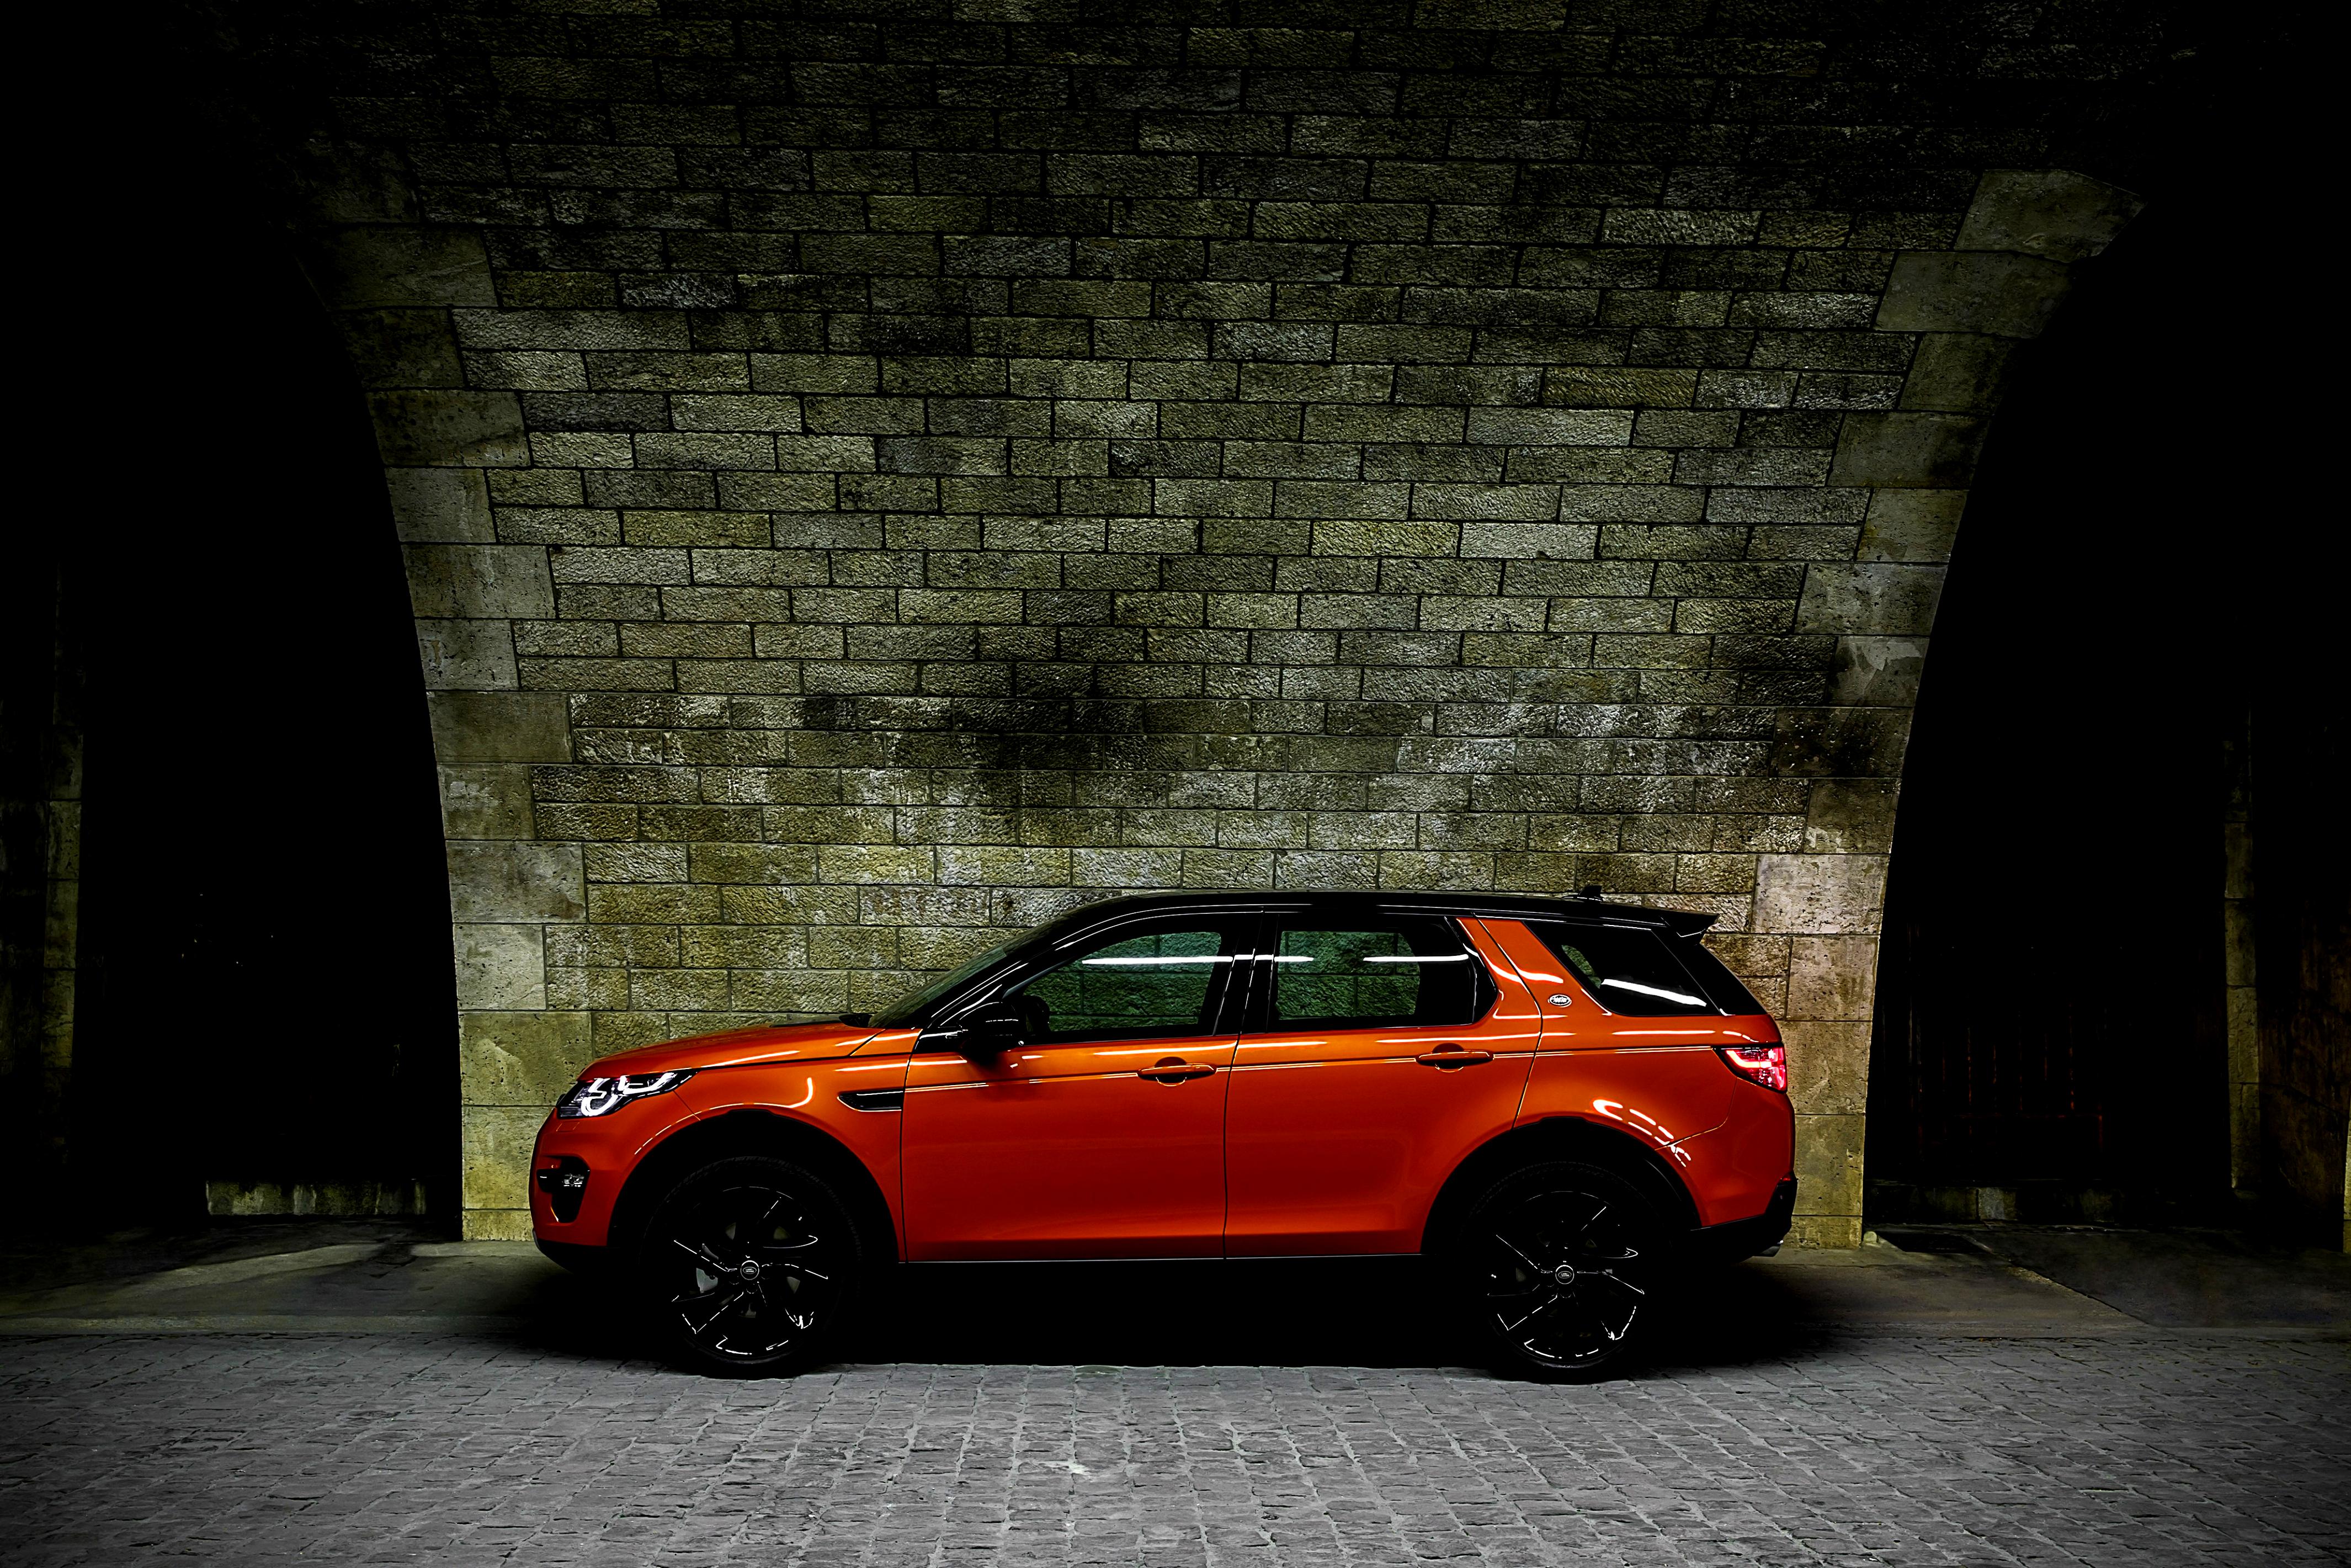 Land Rover Discovery Sport 2014 #79